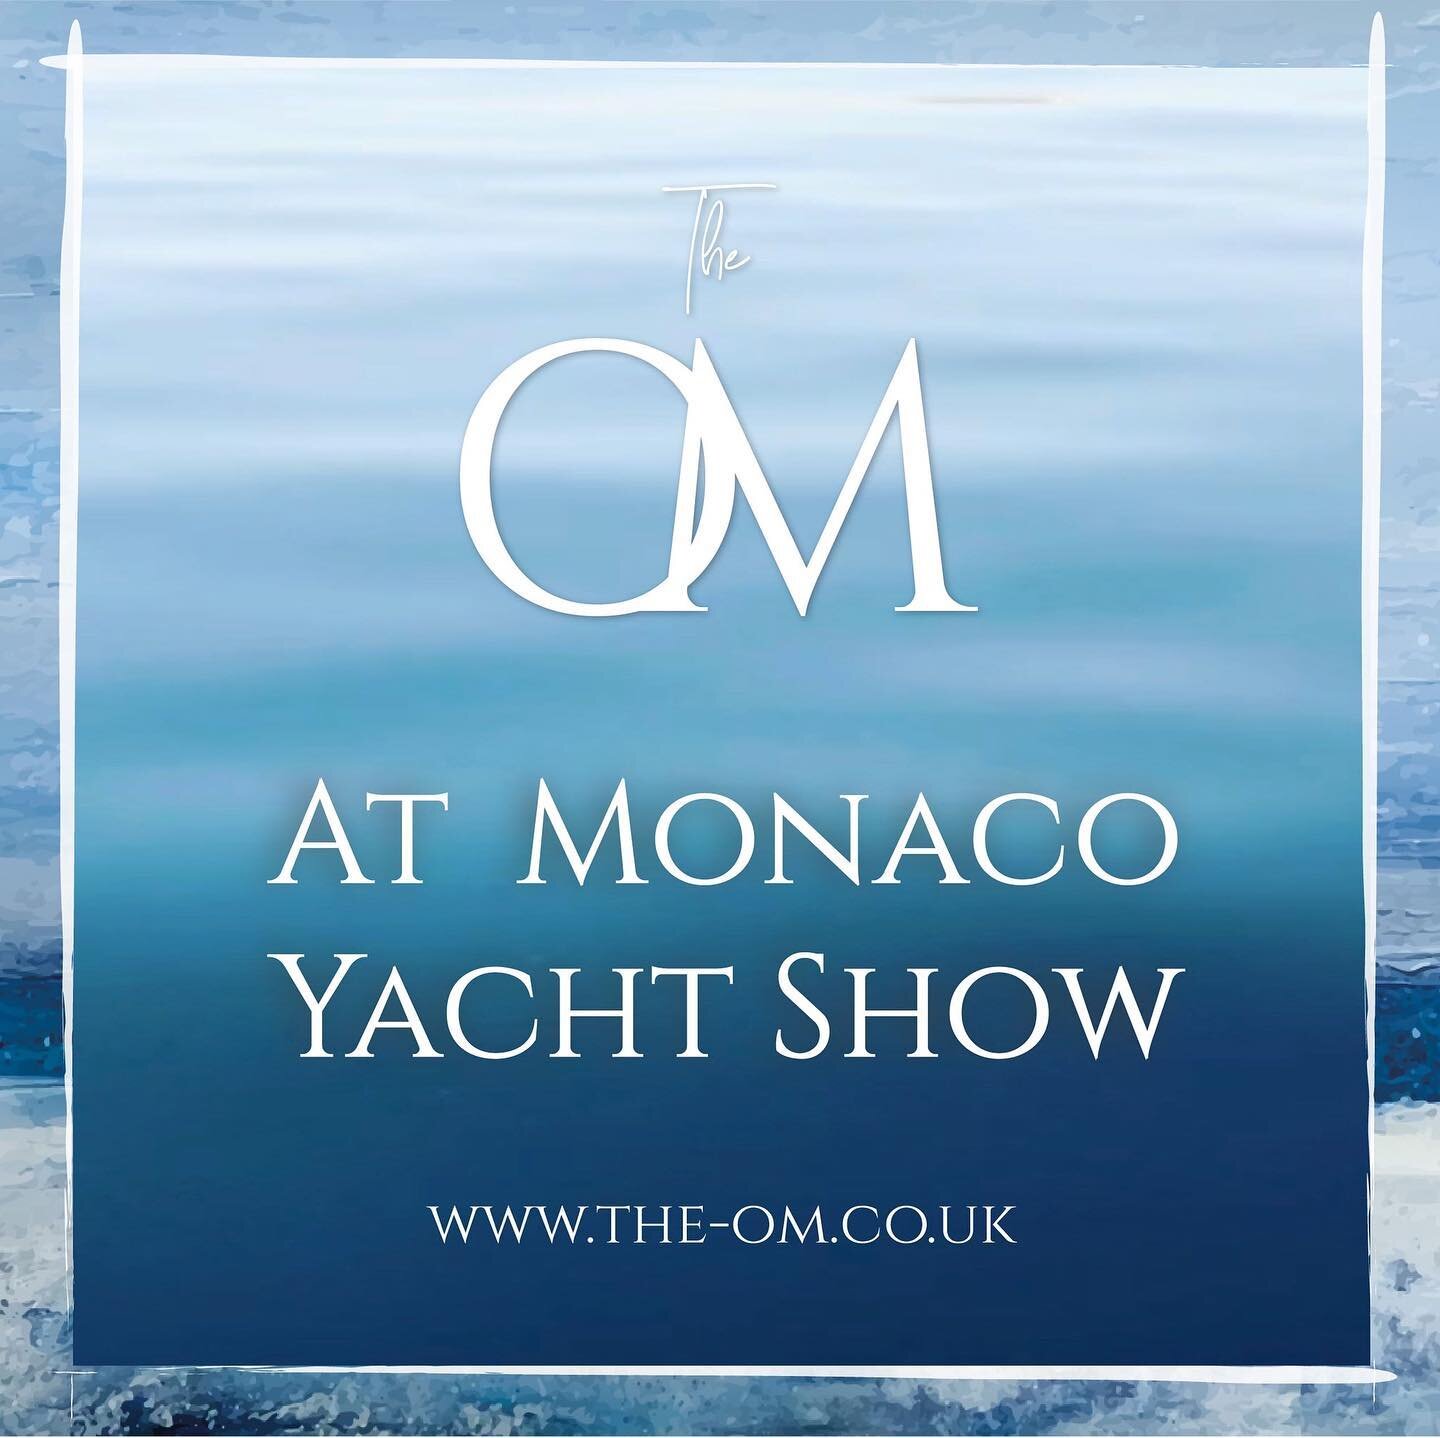 The Monaco Yacht Show is almost upon us and I am looking forward to catching up with contacts old and new. 

The show is the absolute best B2B opportunity in the Superyacht calendar and I always come away with new relationships forged and new busines